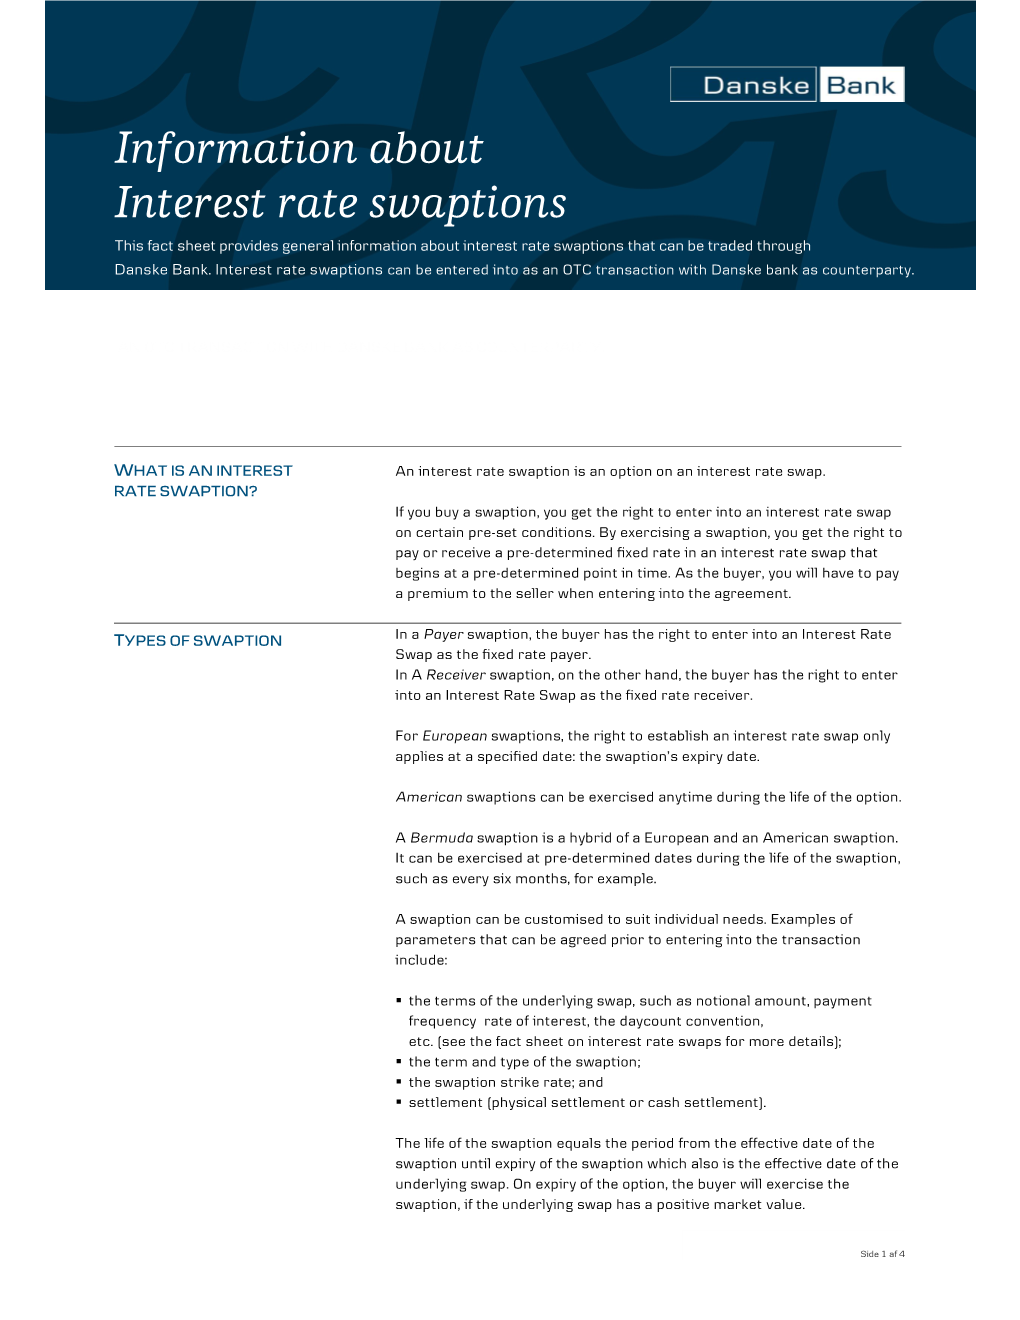 Information About Interest Rate Swaptions That Can Be Traded Through Danske Bank